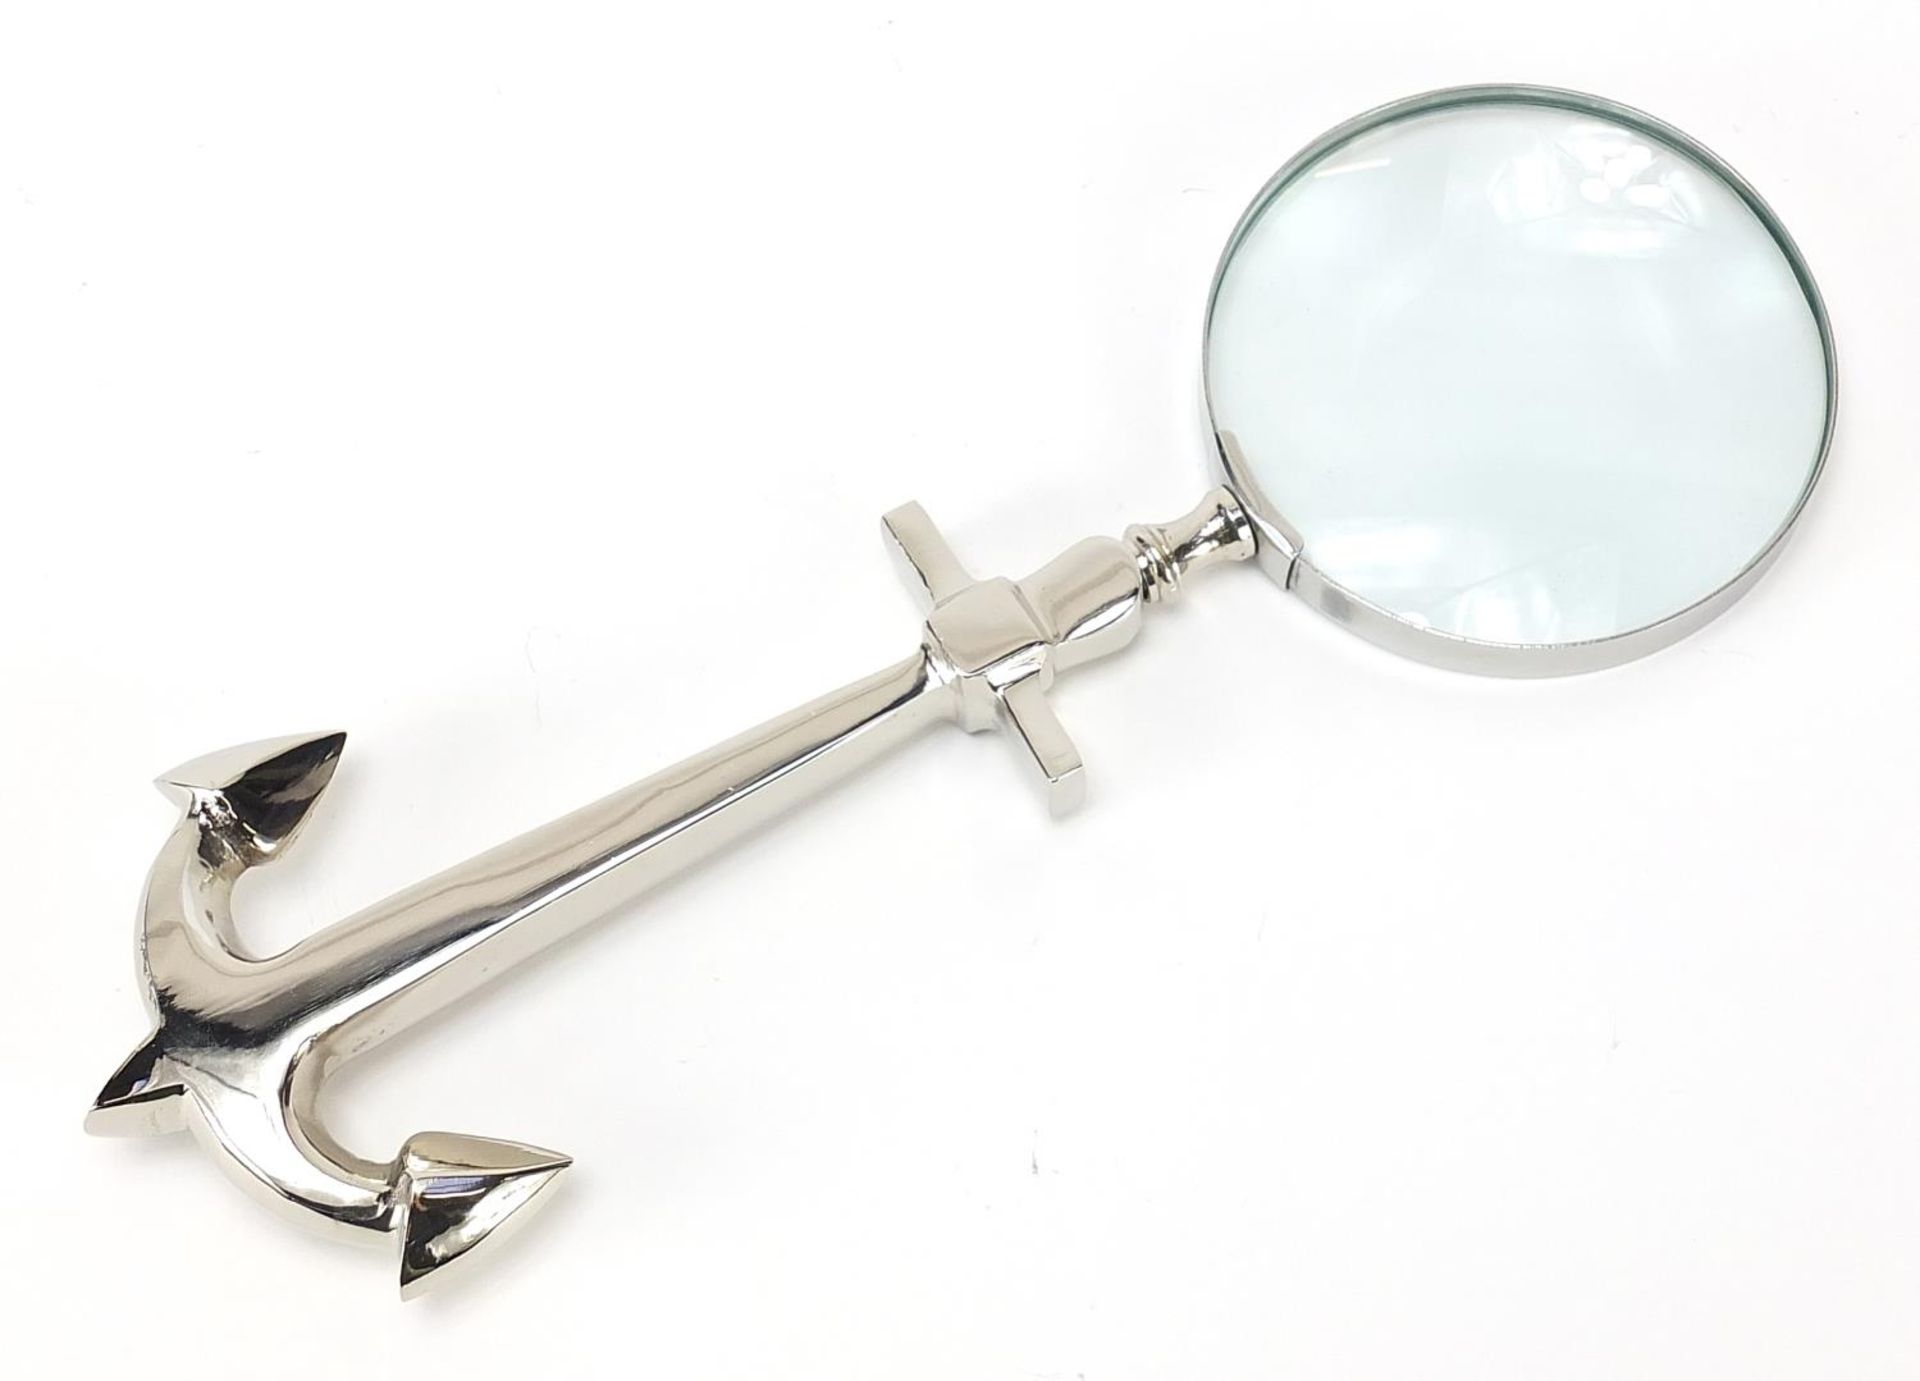 Novelty silver plated magnifying glass in the form of an anchor, 29.5cm in length For further